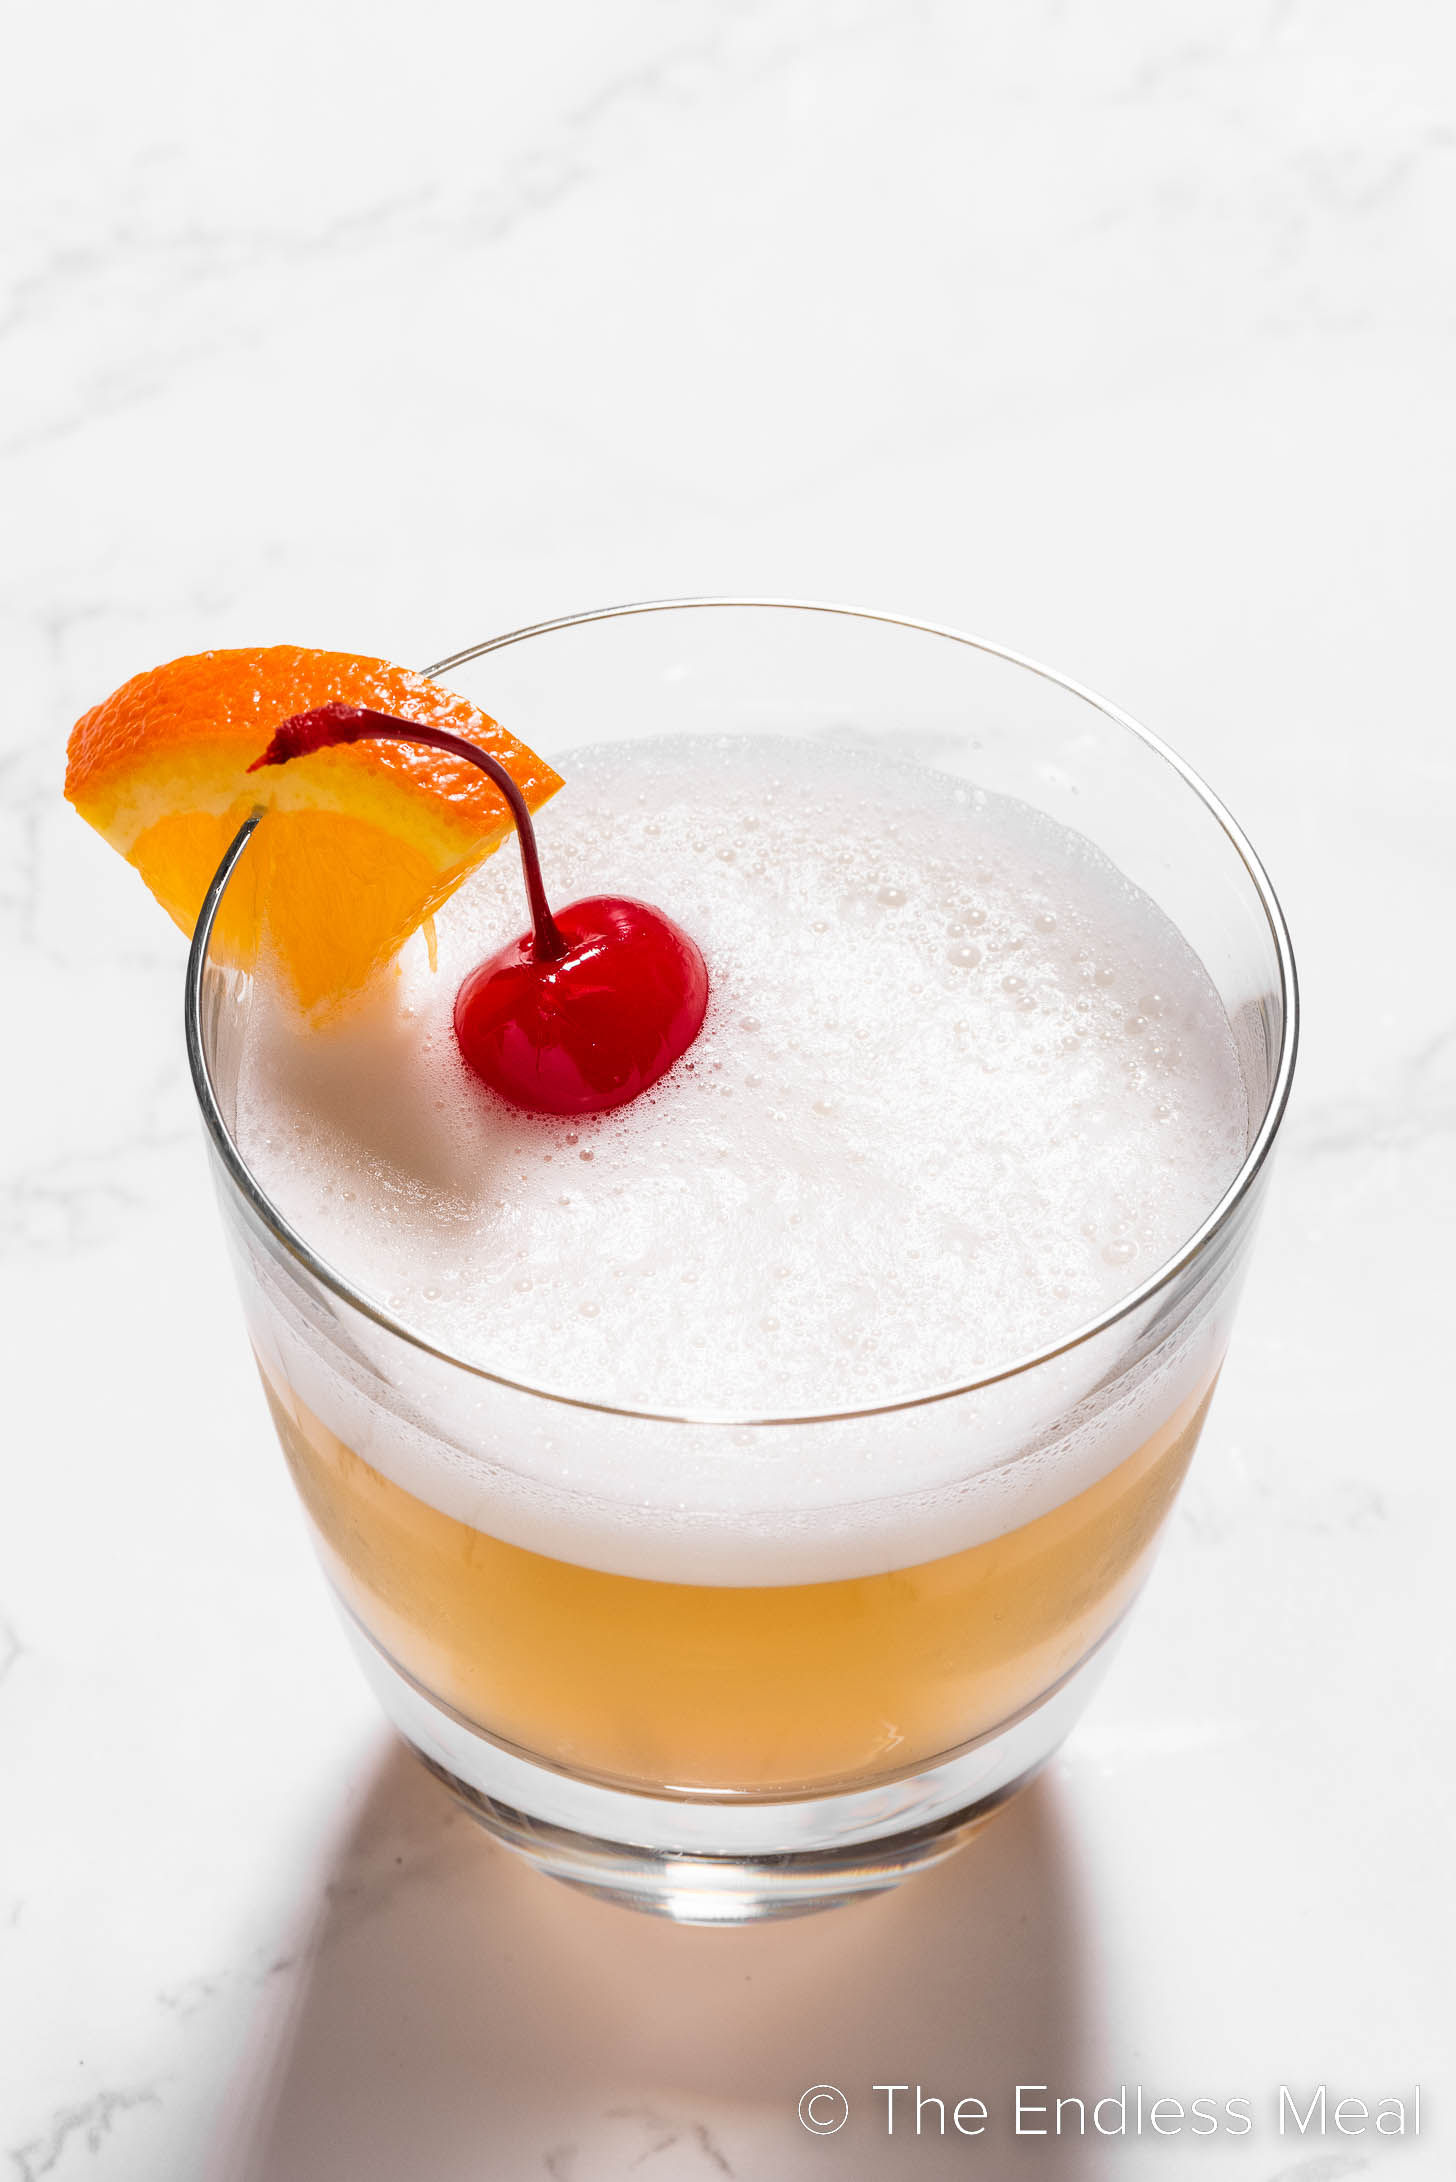 The Best Bourbon Sour garnished with a cocktail cherry and orange wedge.